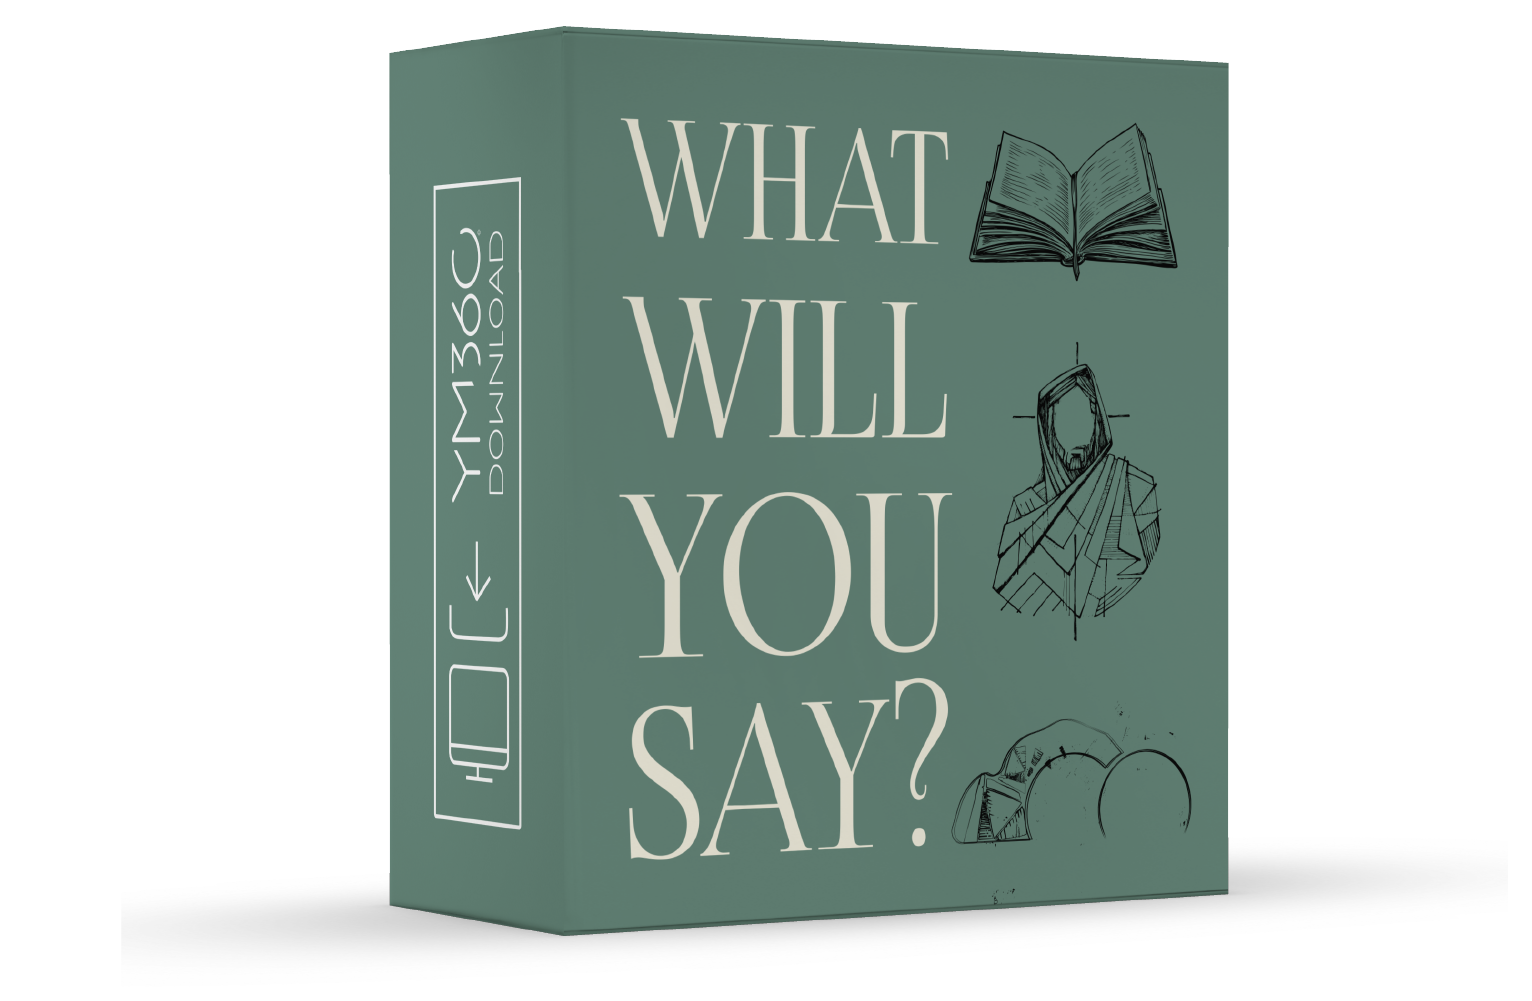 What Will You Say?: The Decision is Yours